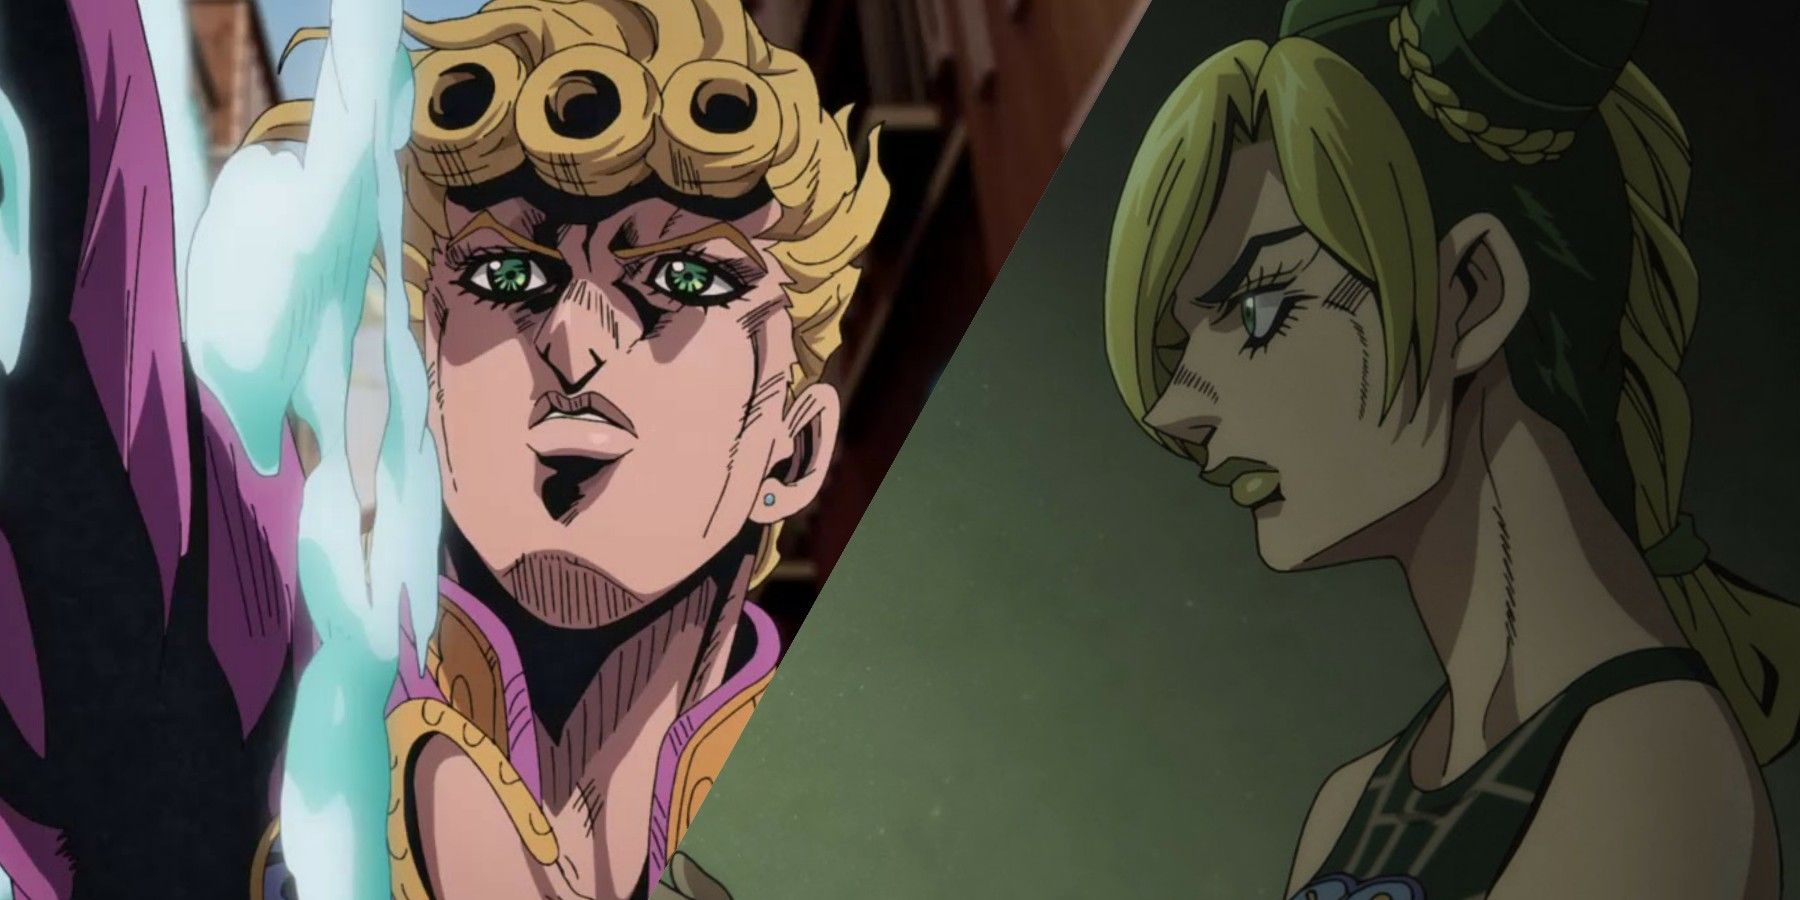 JoJo: What Happened to Giorno After Part 5?